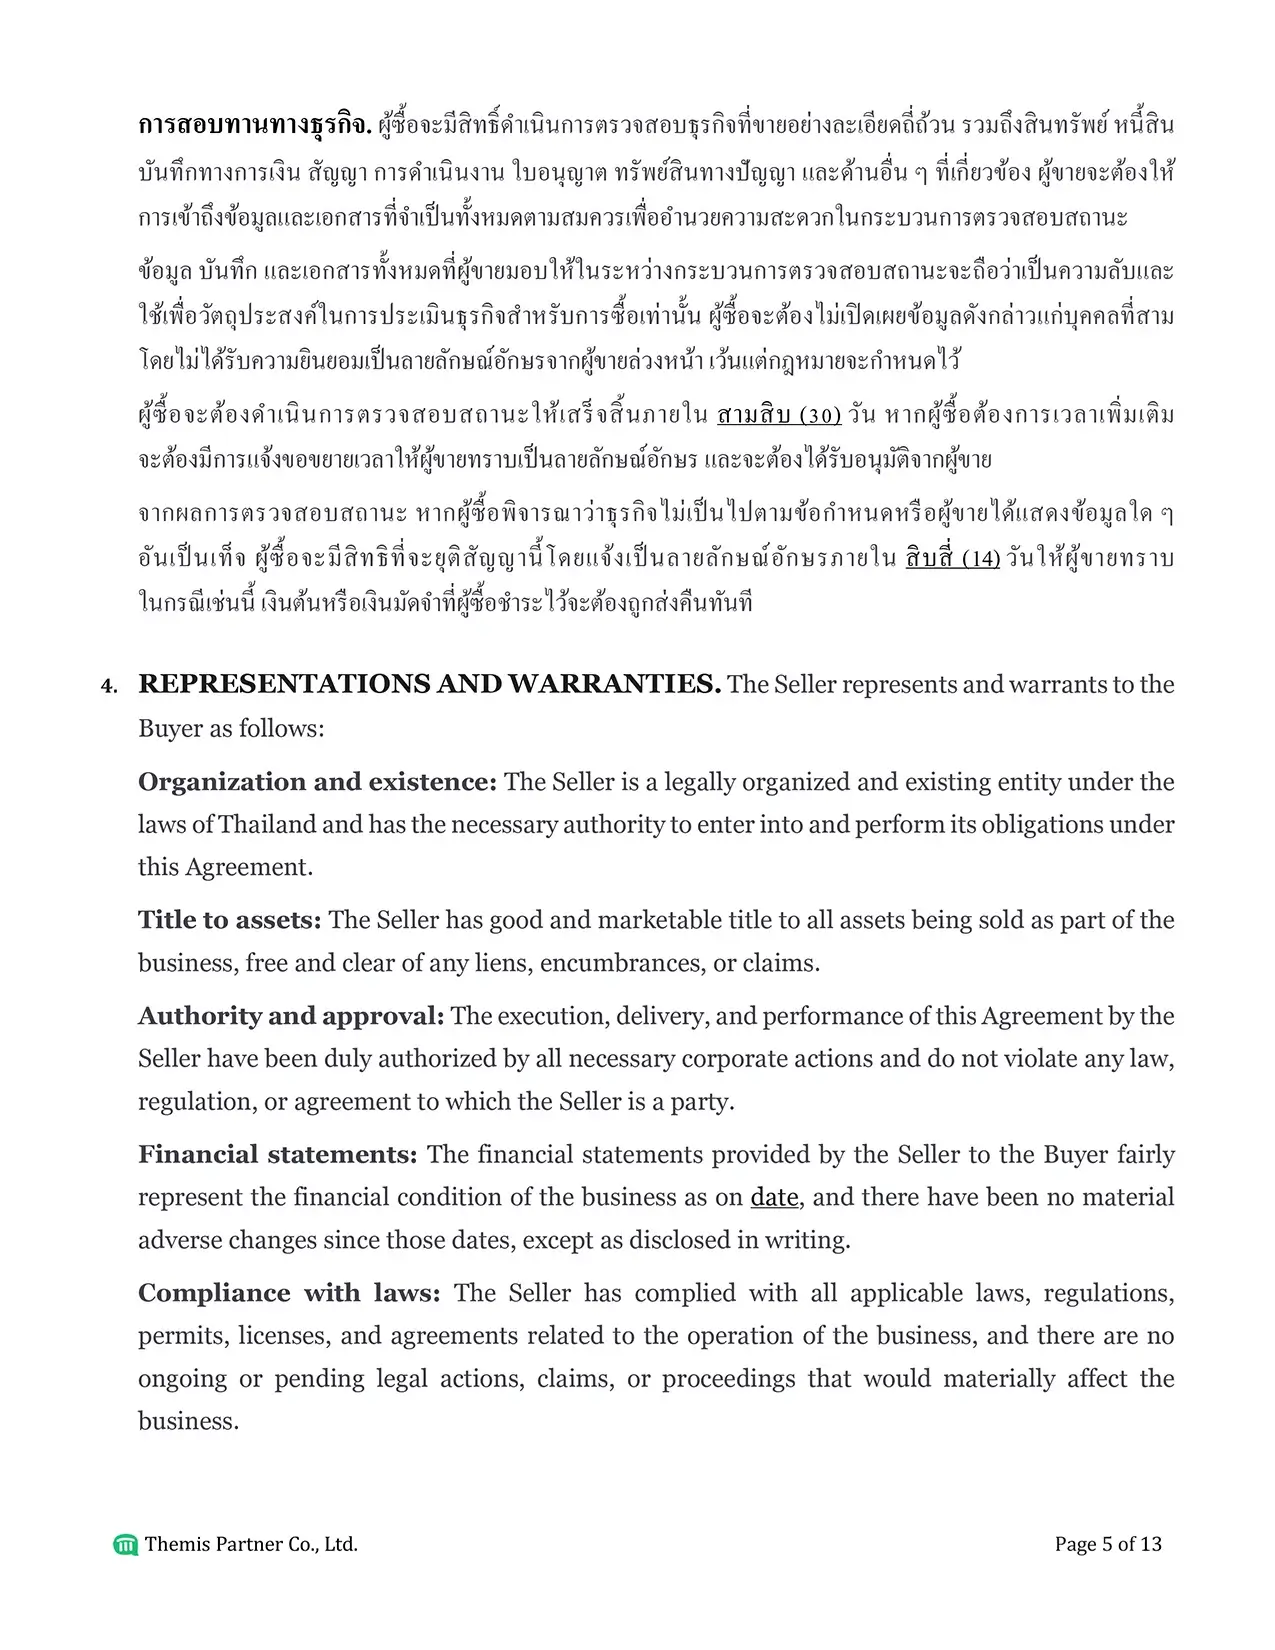 Business purchase agreement Thailand 5